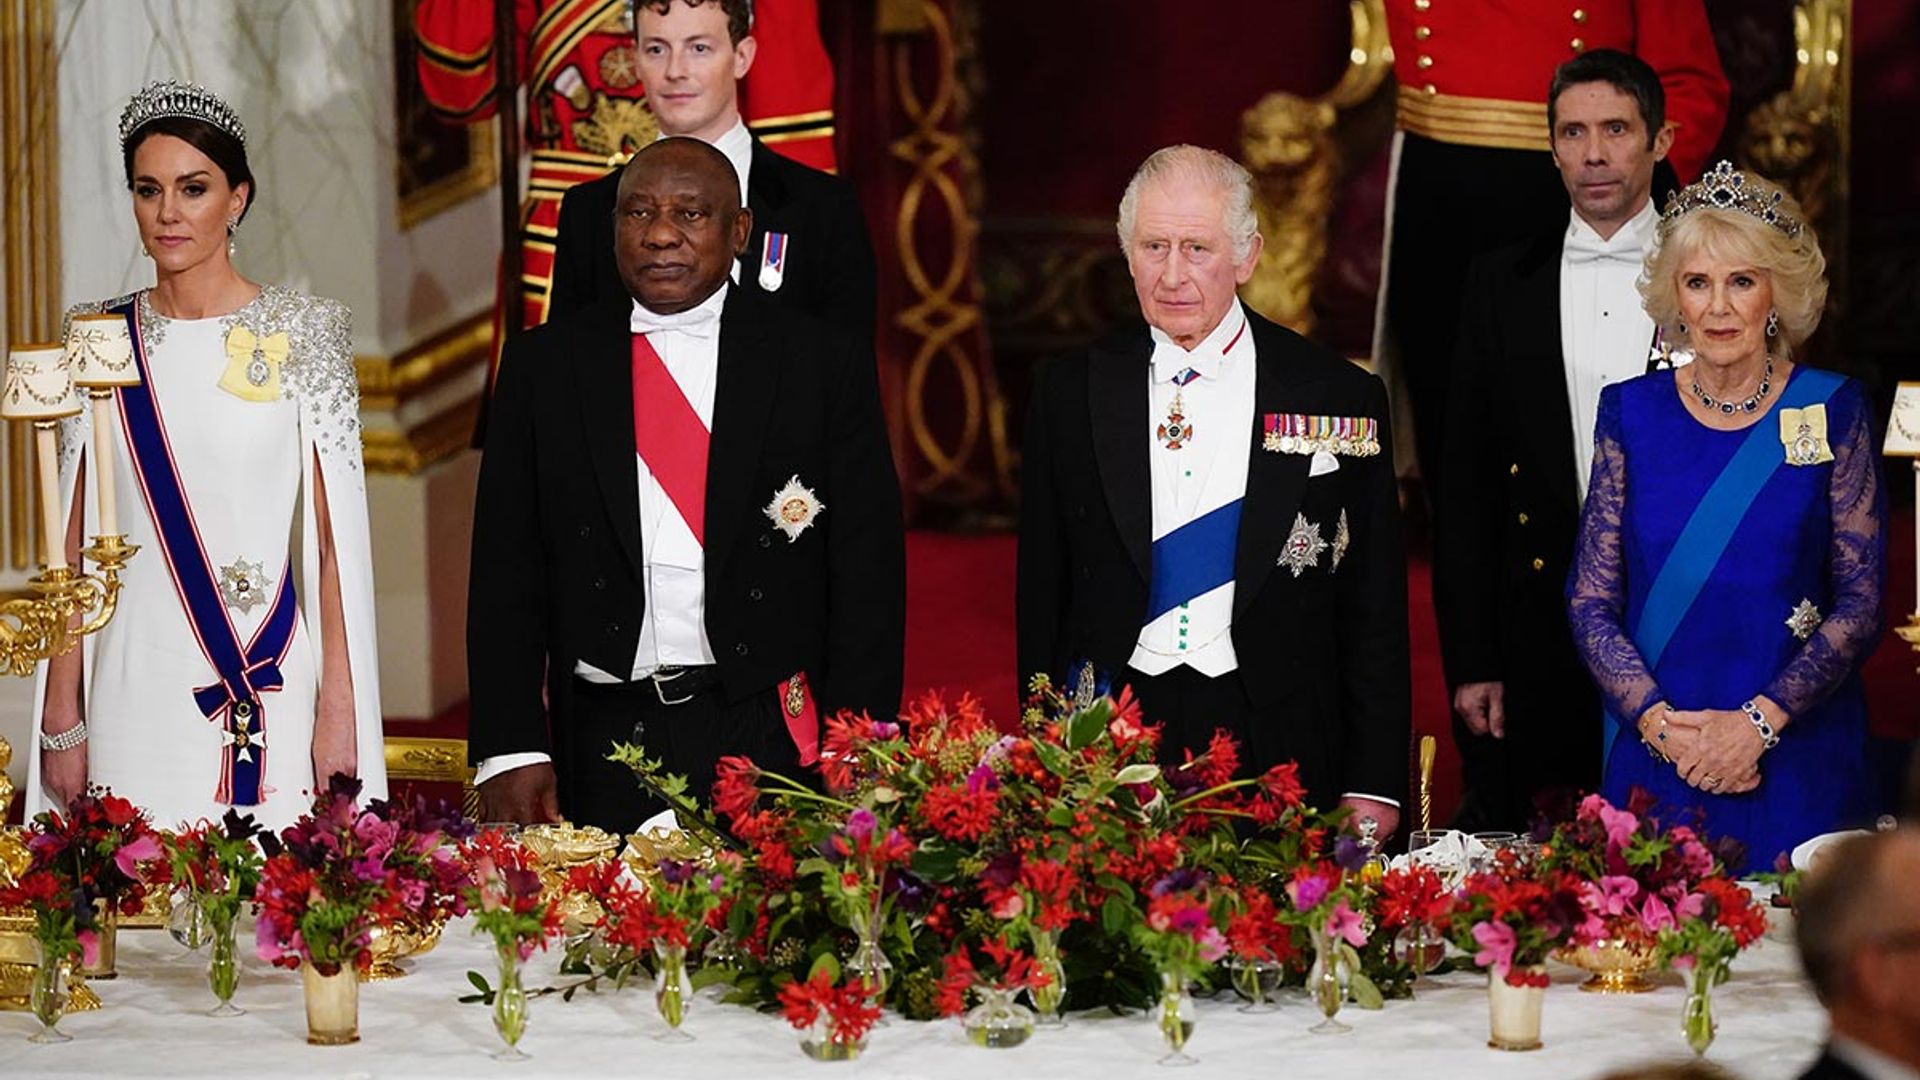 Kate Middleton and Queen Consort Camilla dazzle guests at State Banquet